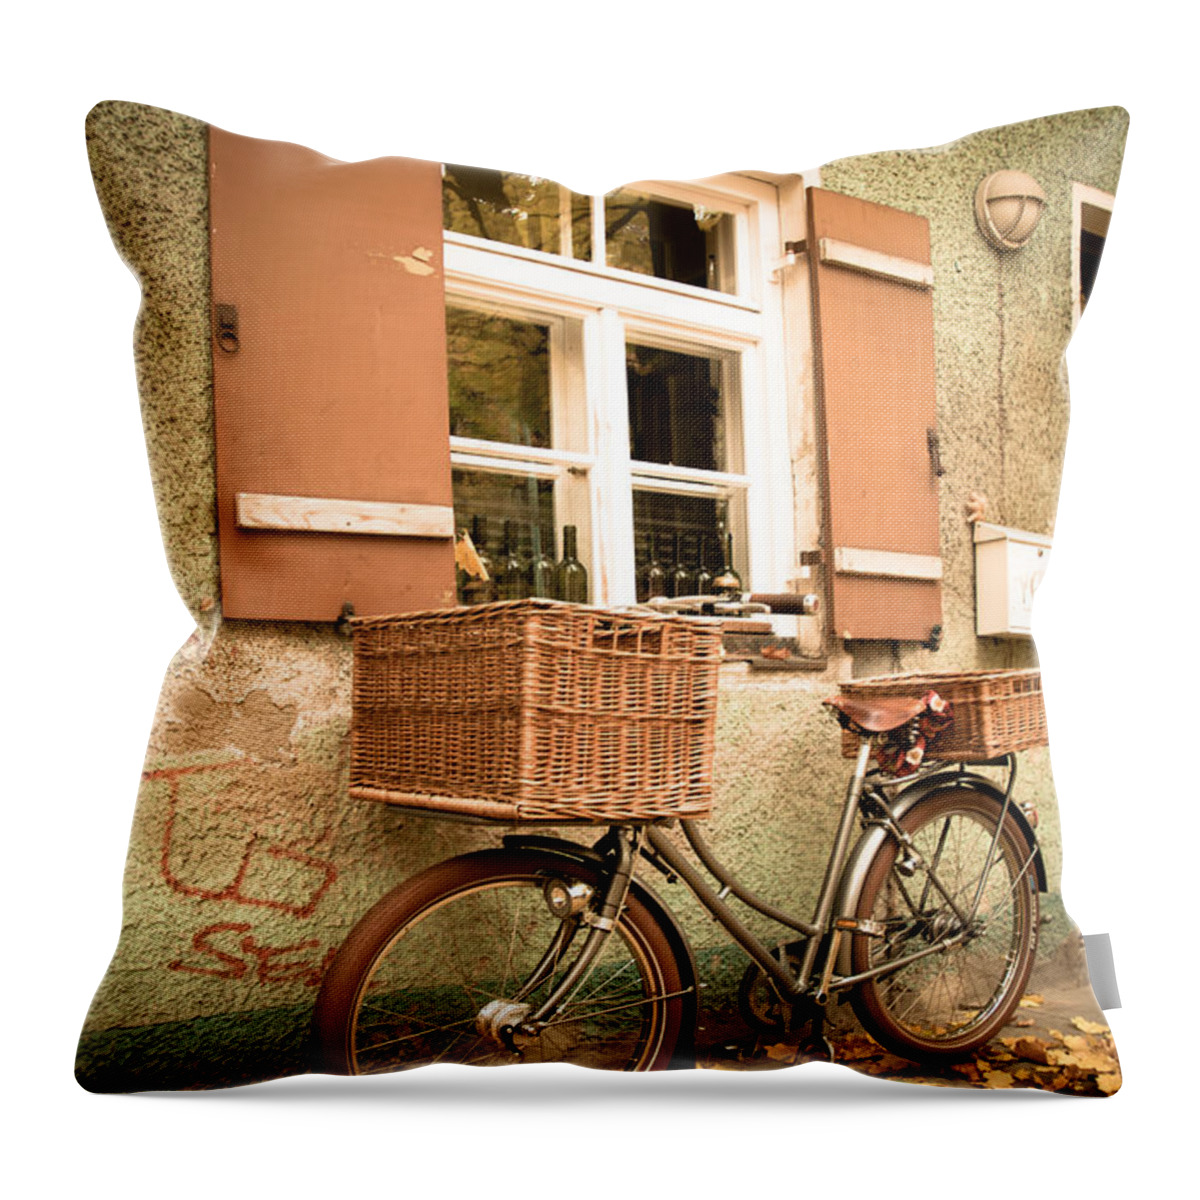 Autumn Throw Pillow featuring the photograph The Bicycle by Hannes Cmarits